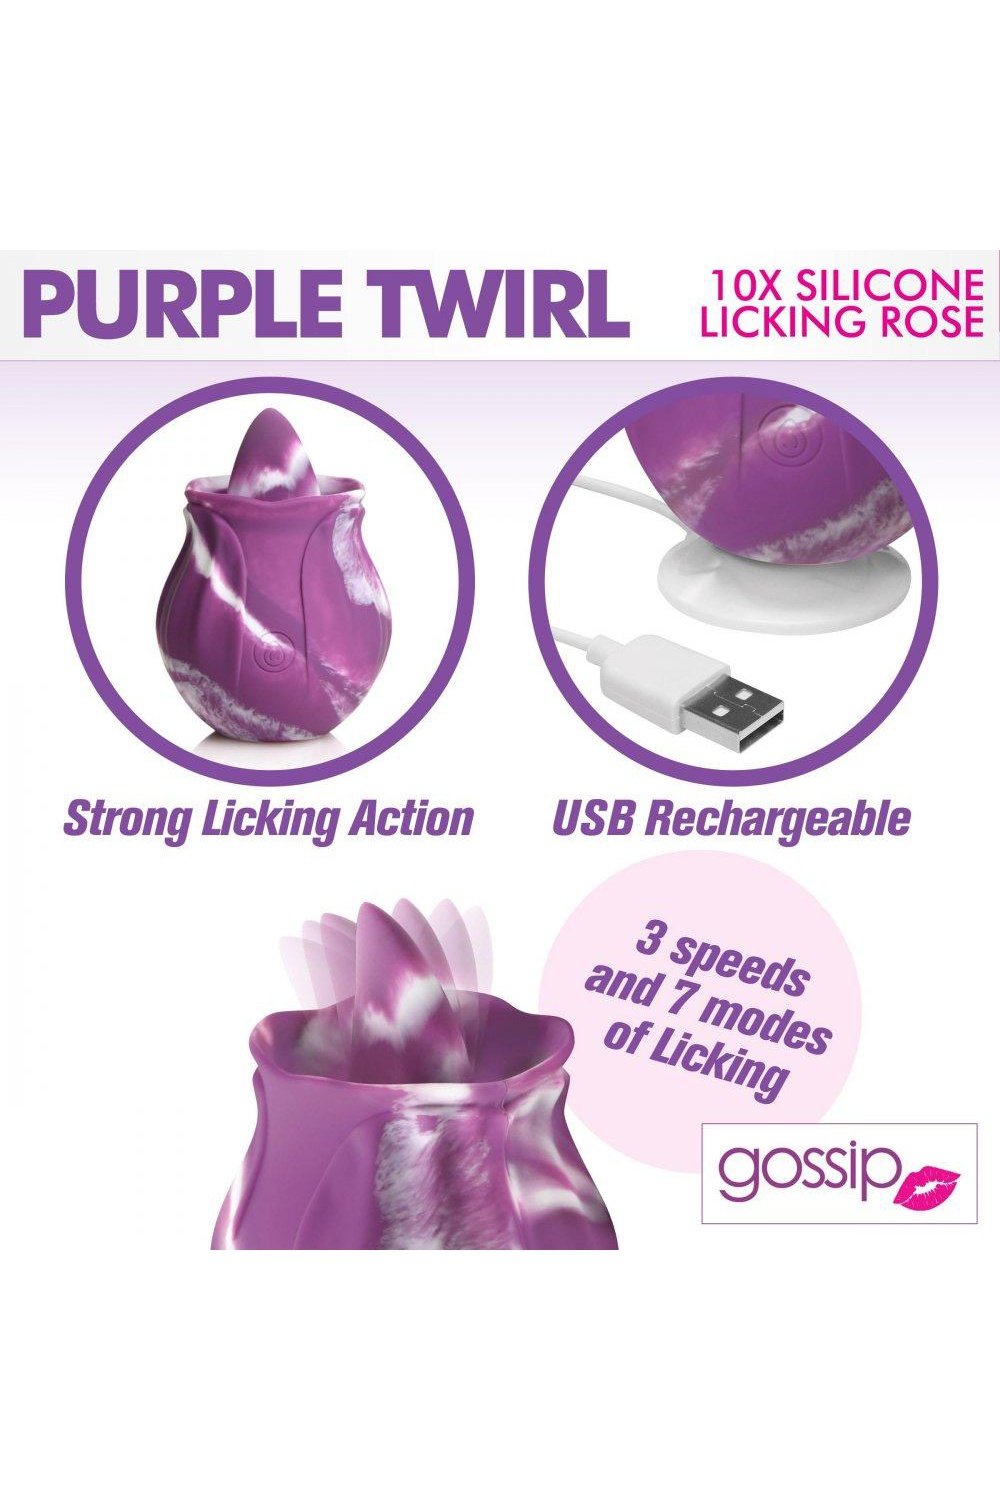 10X Purple Twirl Silicone Licking Rose - Sex On the Go